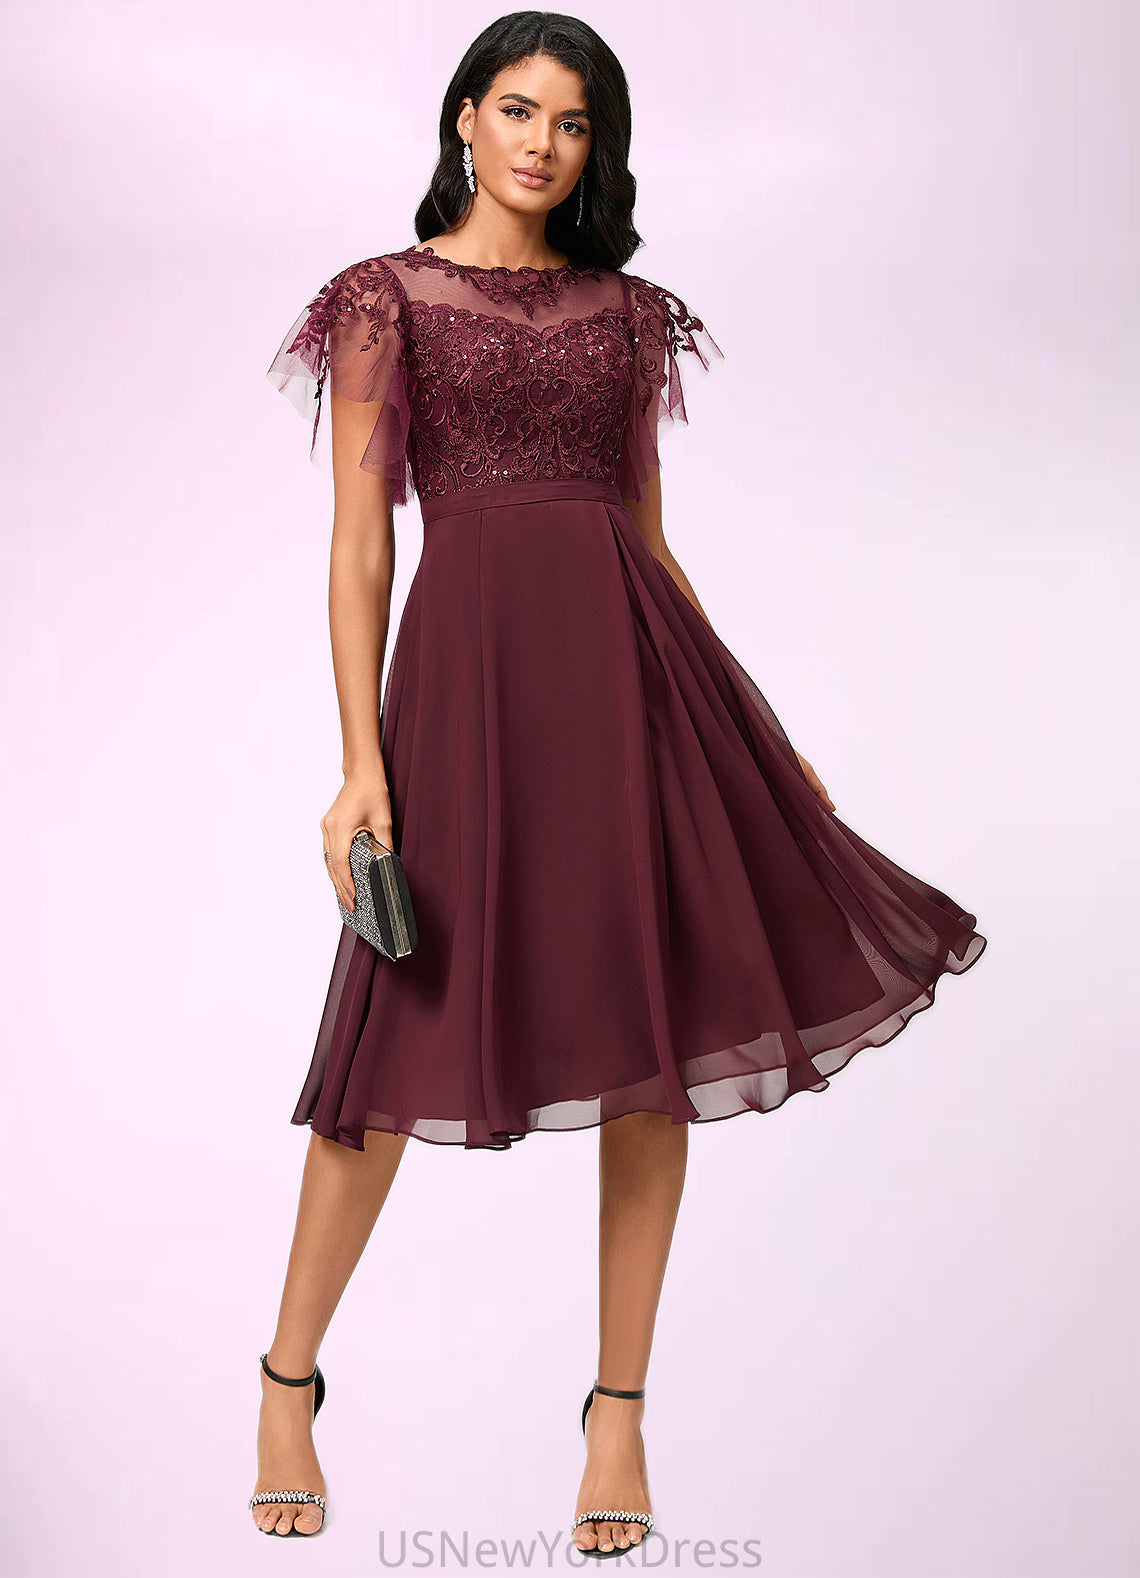 Valeria A-line Illusion Knee-Length Chiffon Cocktail Dress With Sequins DJP0022512